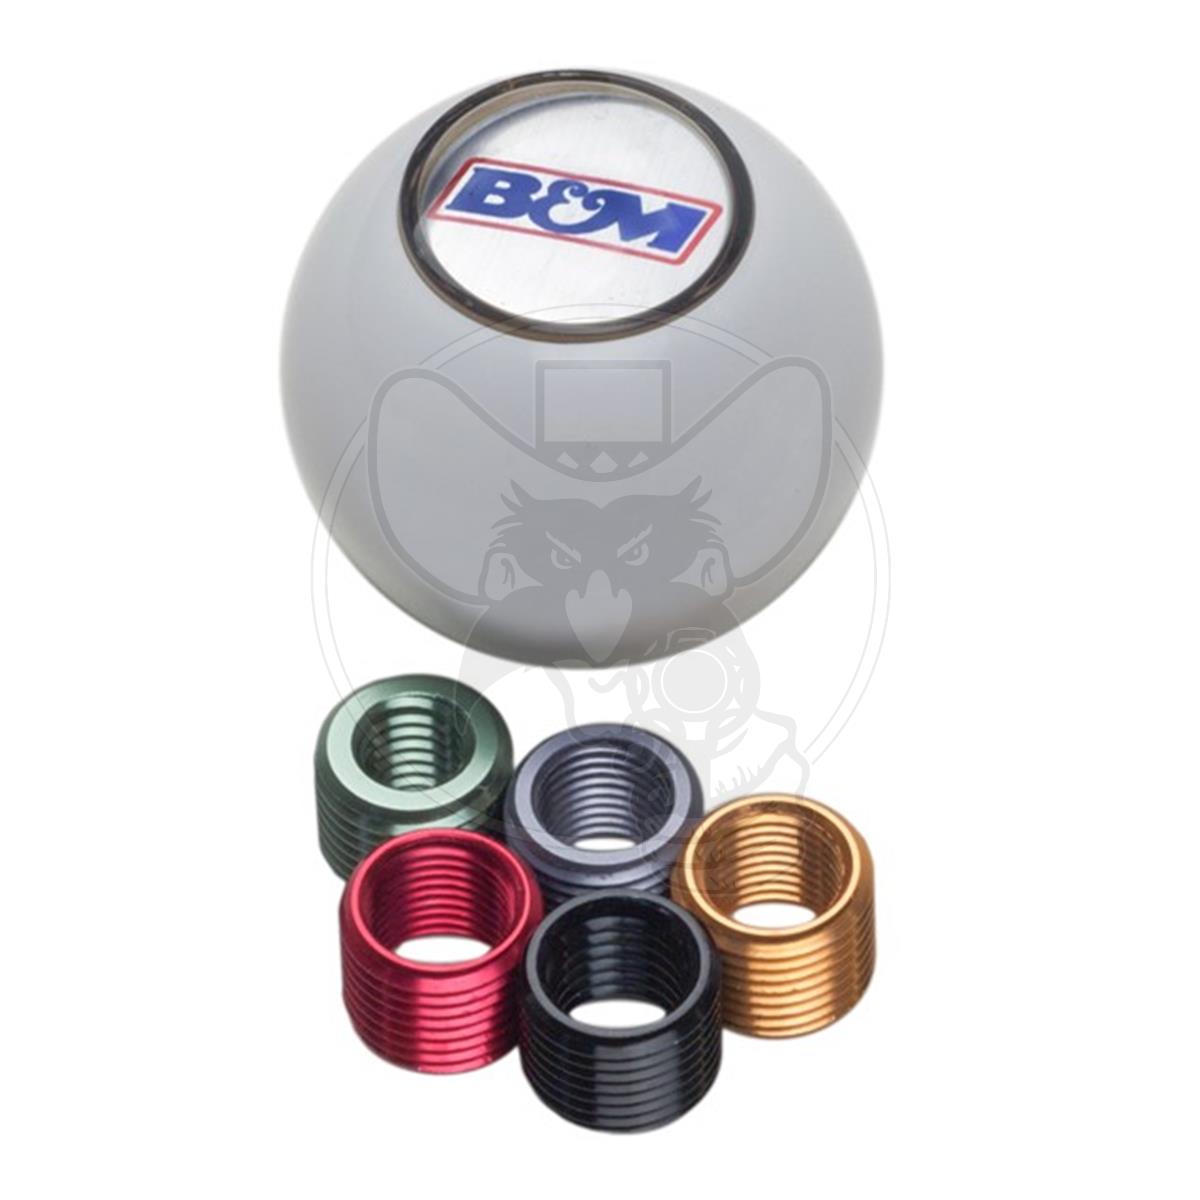 B&M GEAR SHIFTER KNOB ROUND WHITE WITH MULTIPLE THREAD ADAPTORS